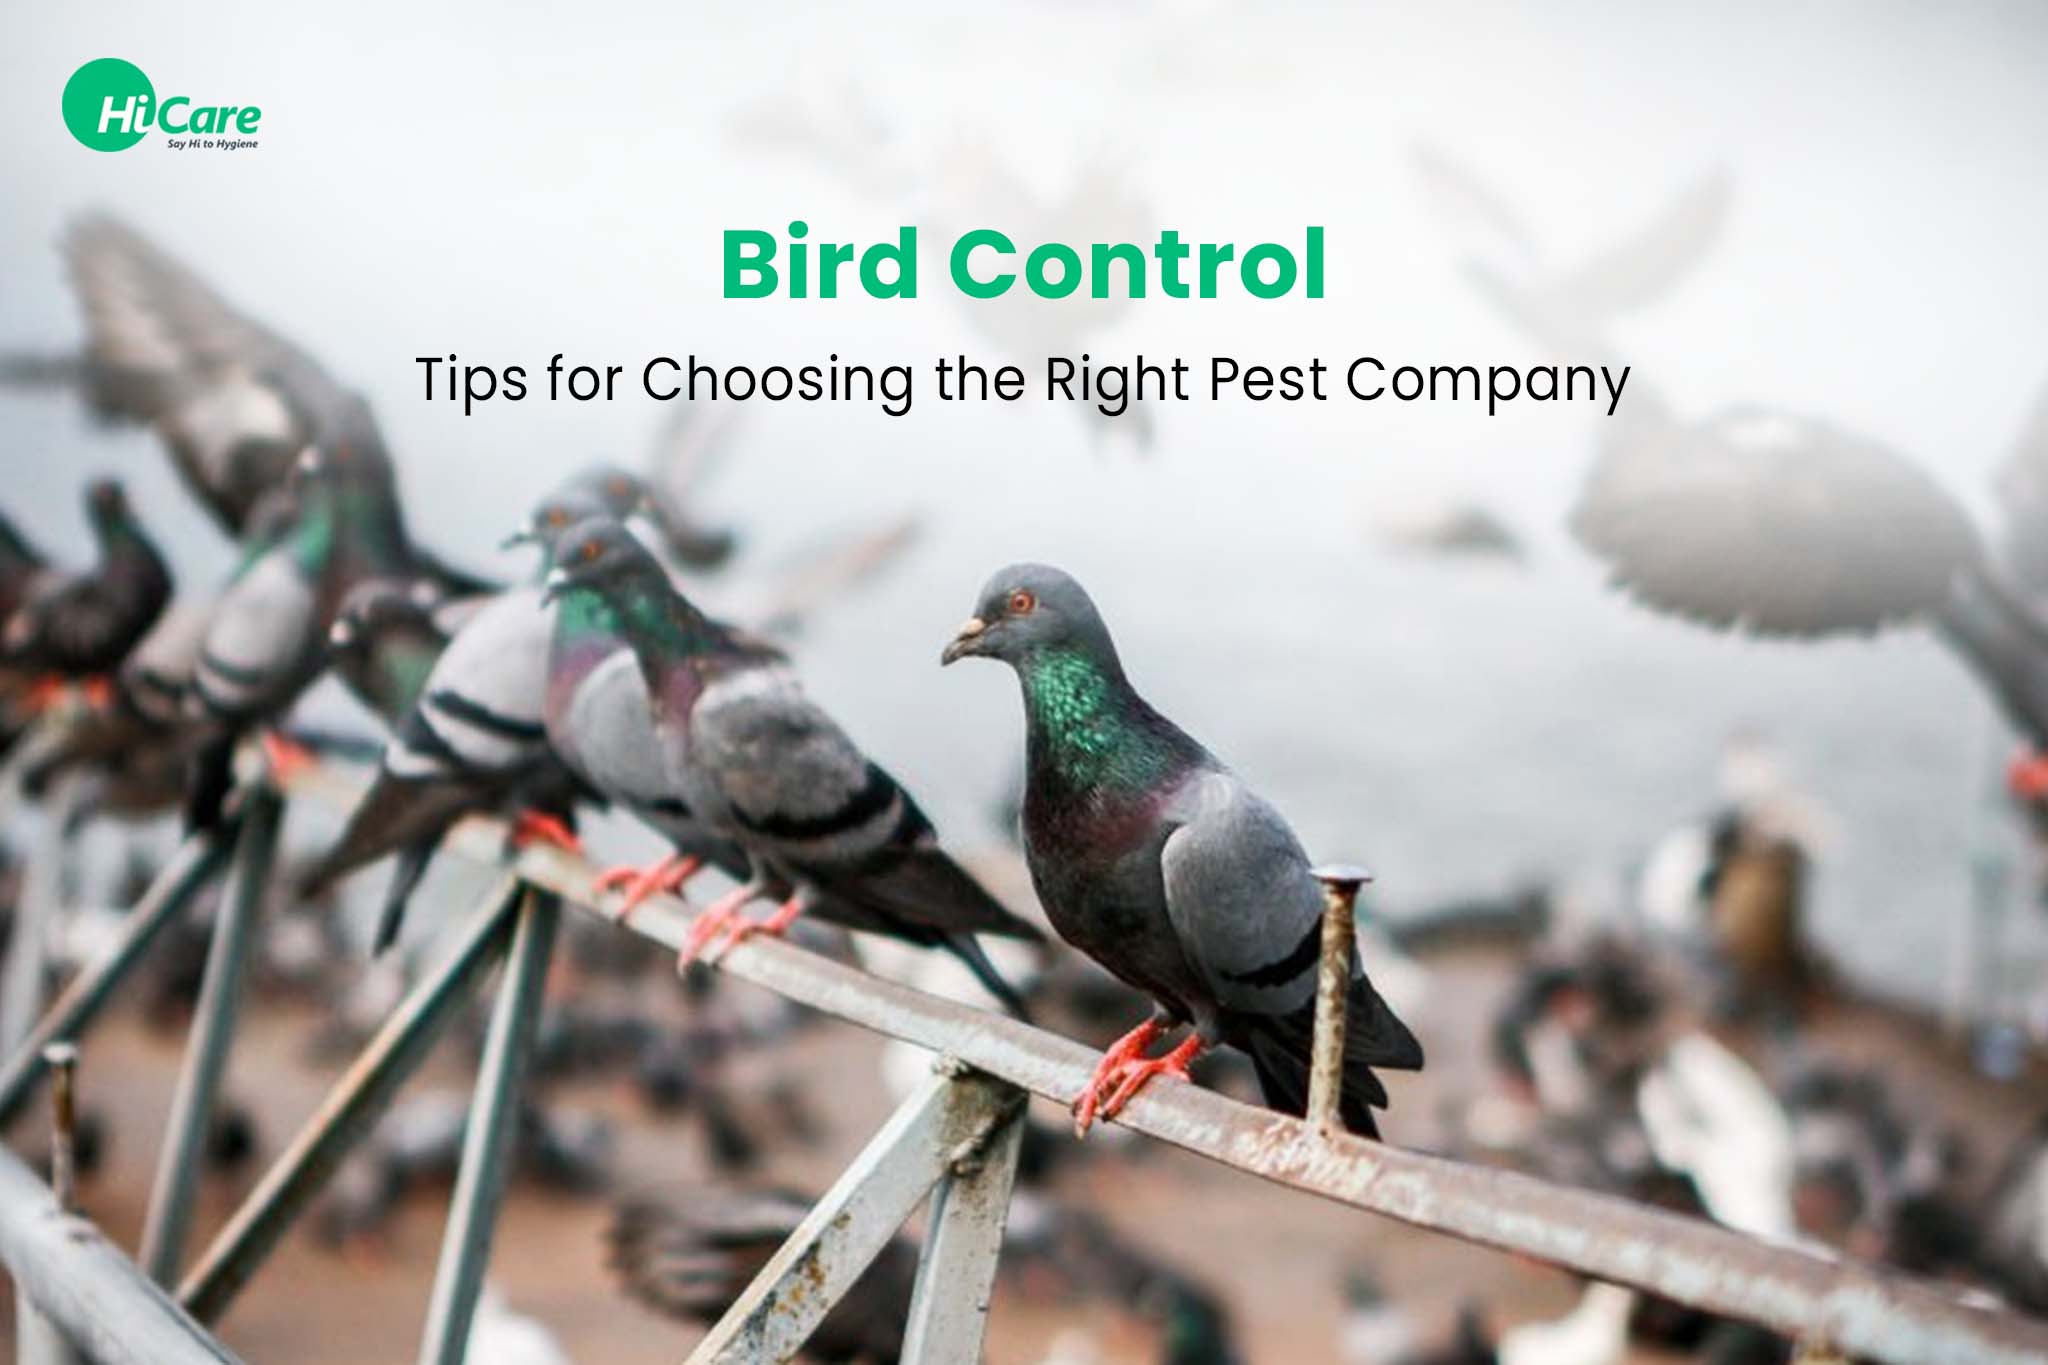 Bird Control: Tips for Choosing the Right Pest Company